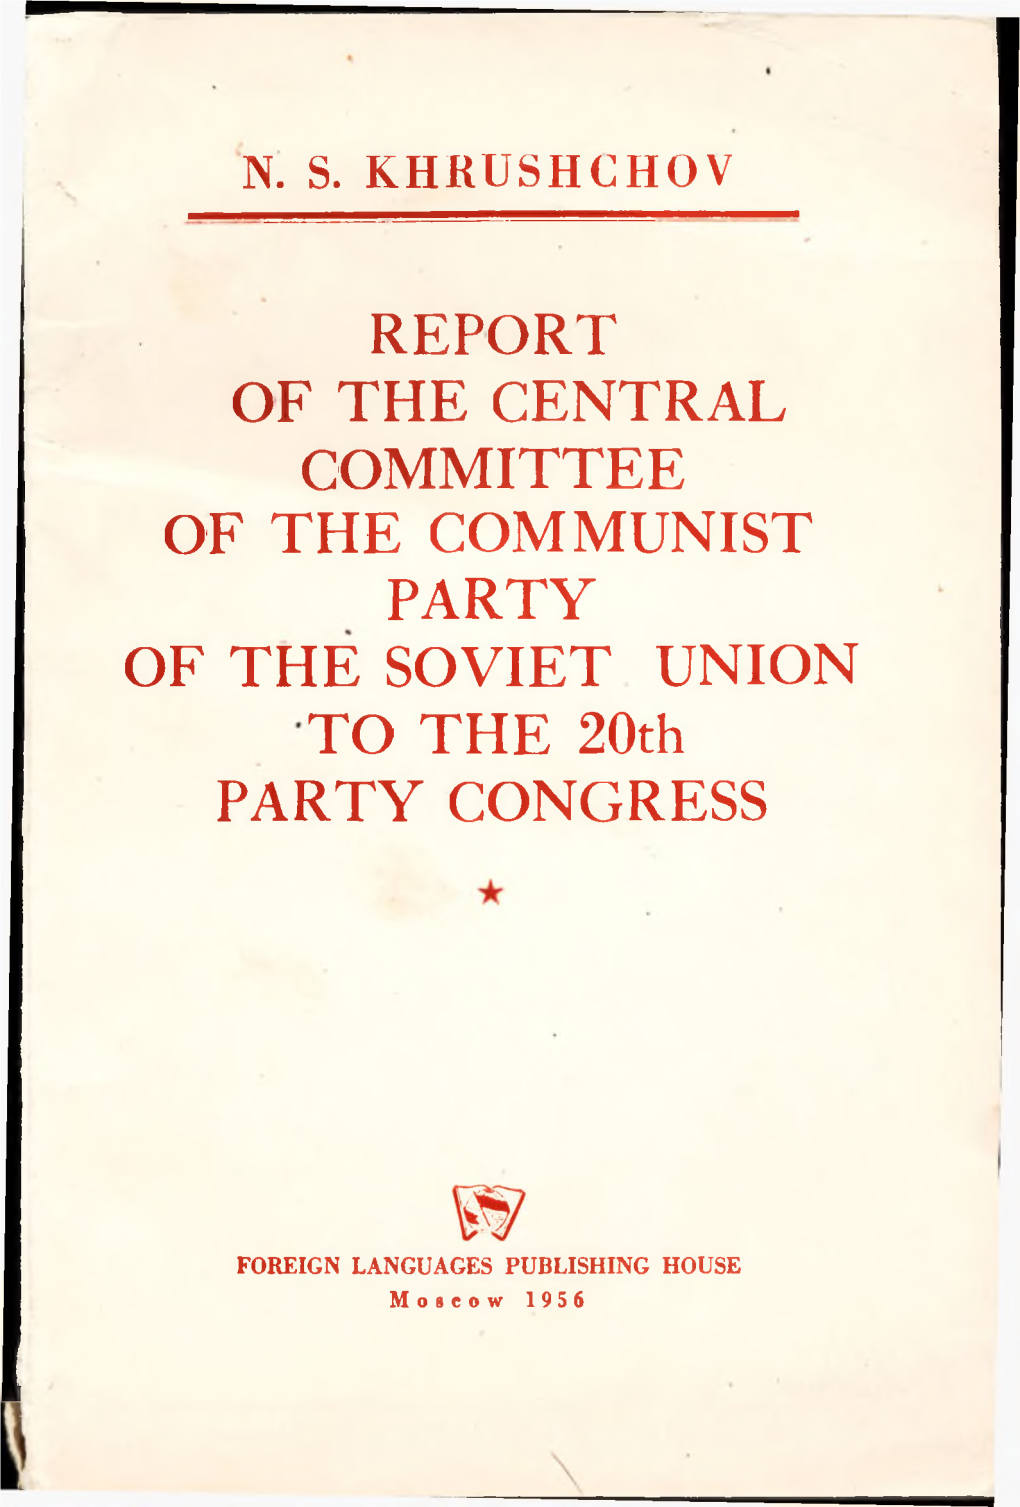 REPORT of the CENTRAL COMMITTEE of the COMMUNIST PARTY of the SOVIET UNION to the 20Th PARTY CONGRESS